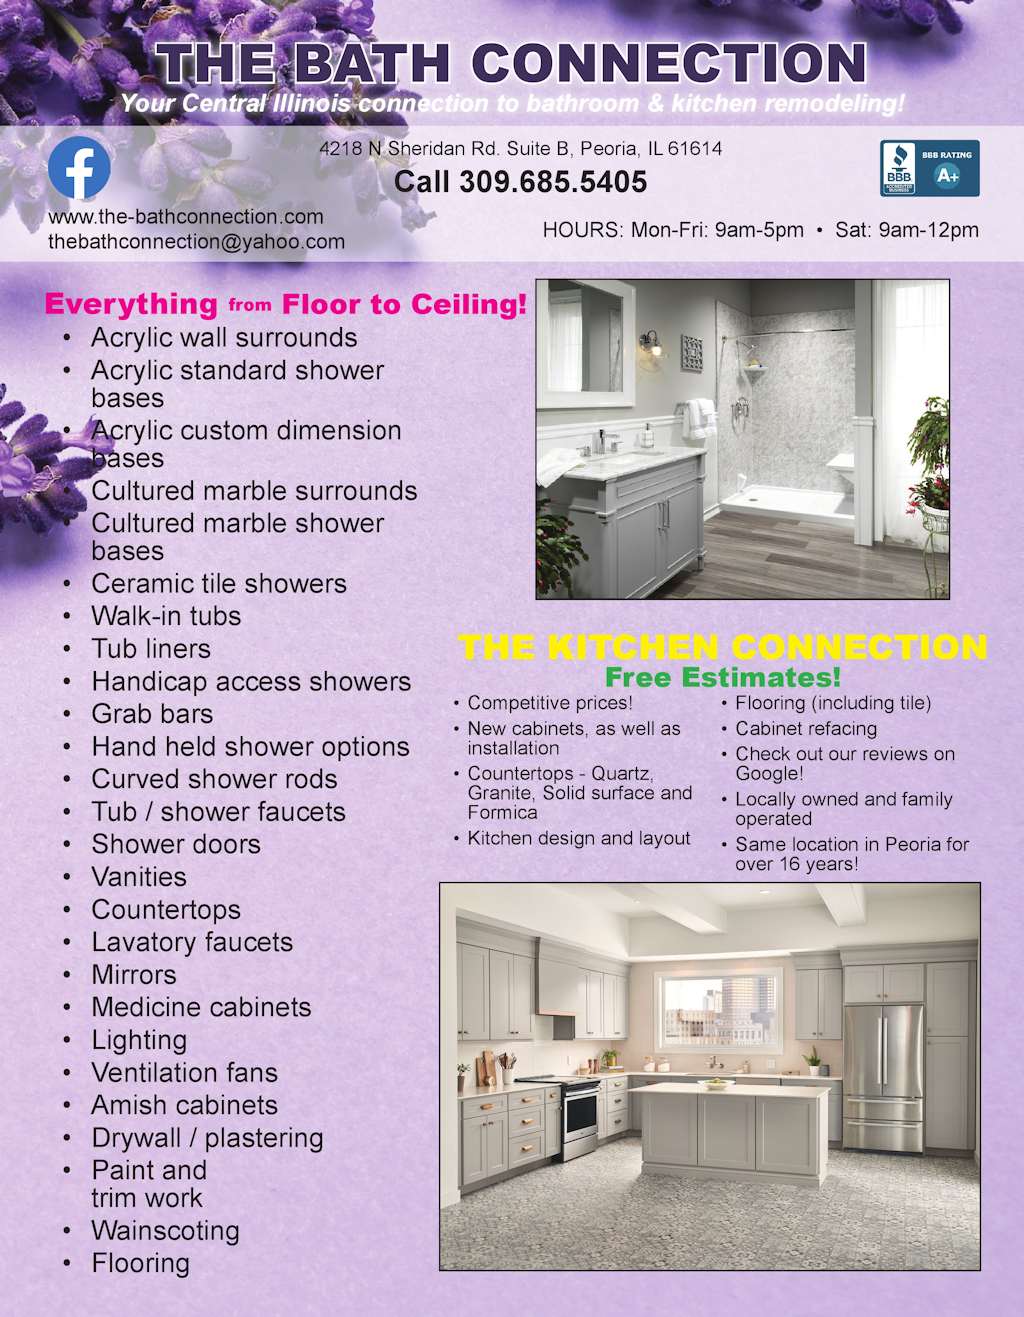 The Kitchen Connection $750 off remodel and 10% off refacing cabinets Peoria, IL